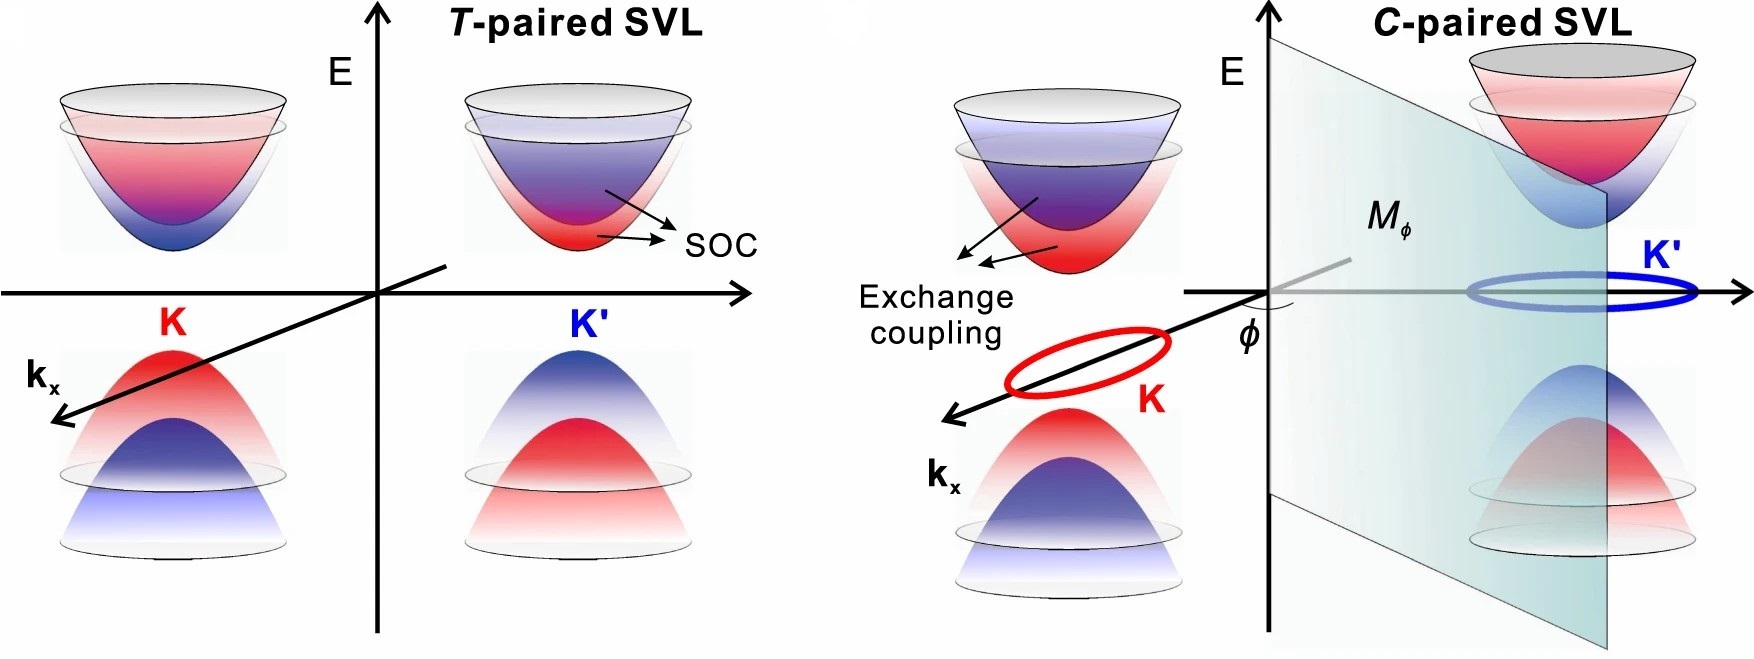 Figure 2. Spin-splitting energy bands of (a) T-paired SVL and (b) C-paired SVL.